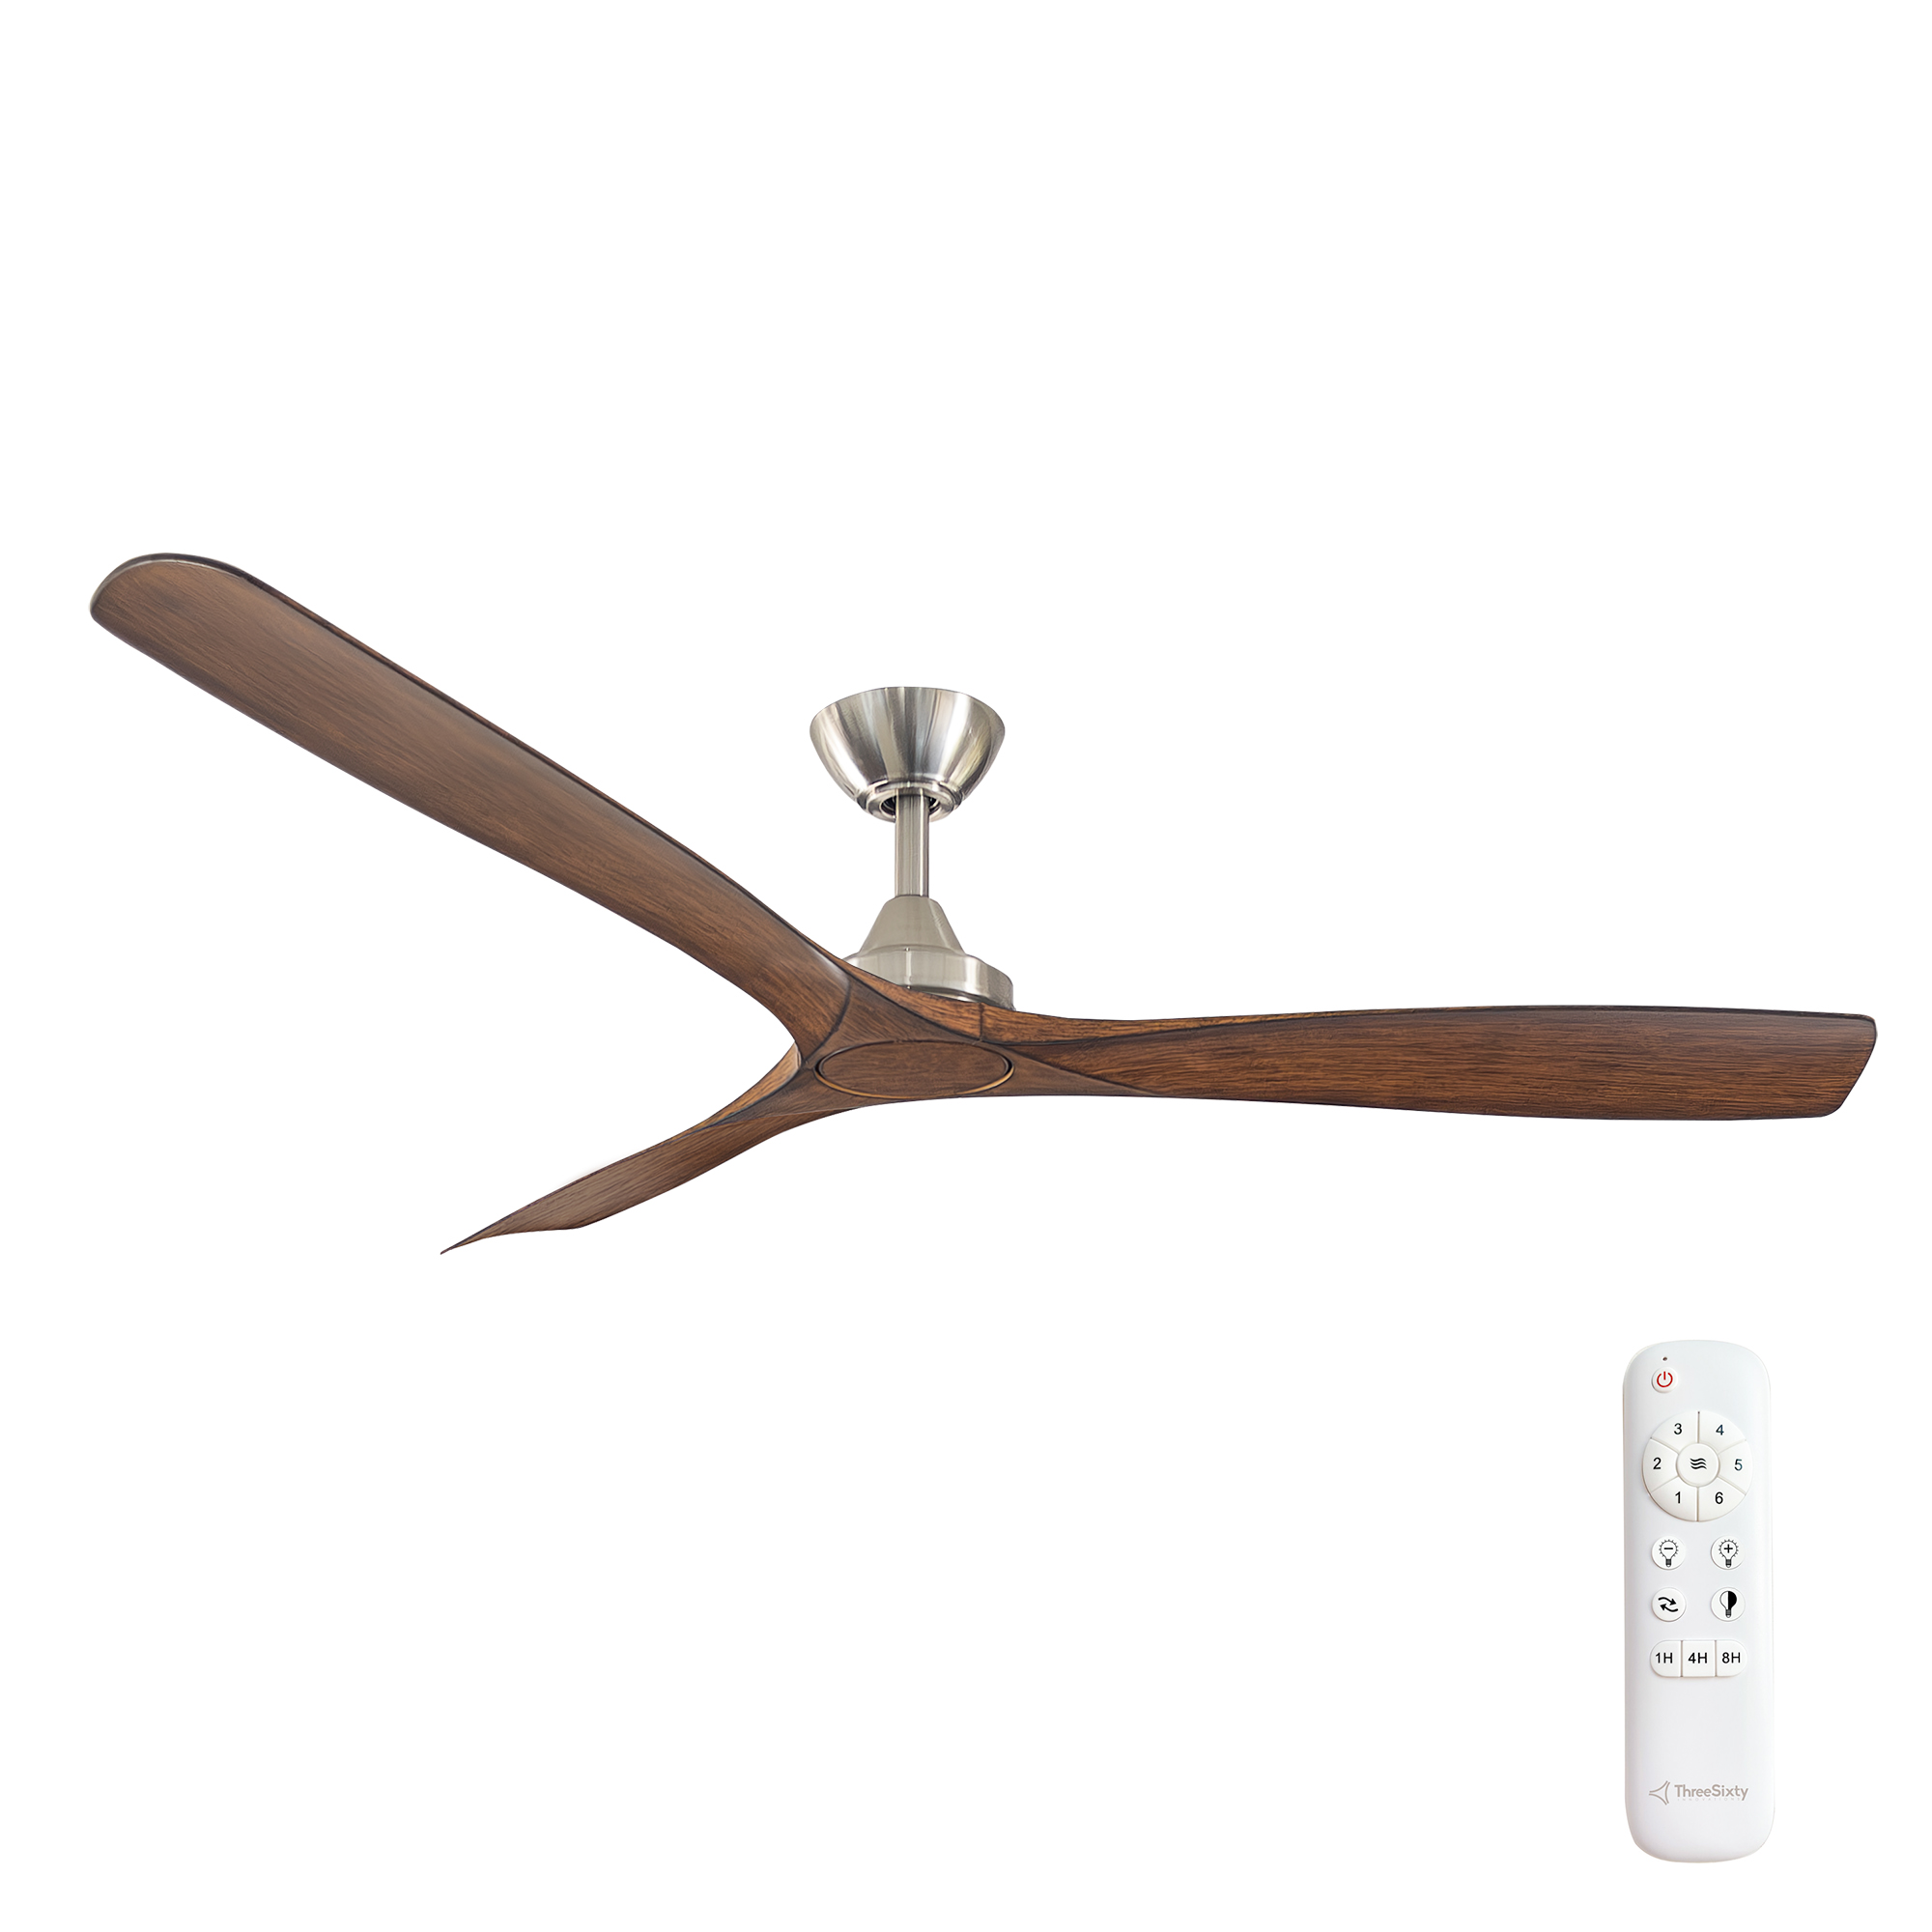 60" Spitfire DC Ceiling Fan in Brushed Nickel with Koa blades